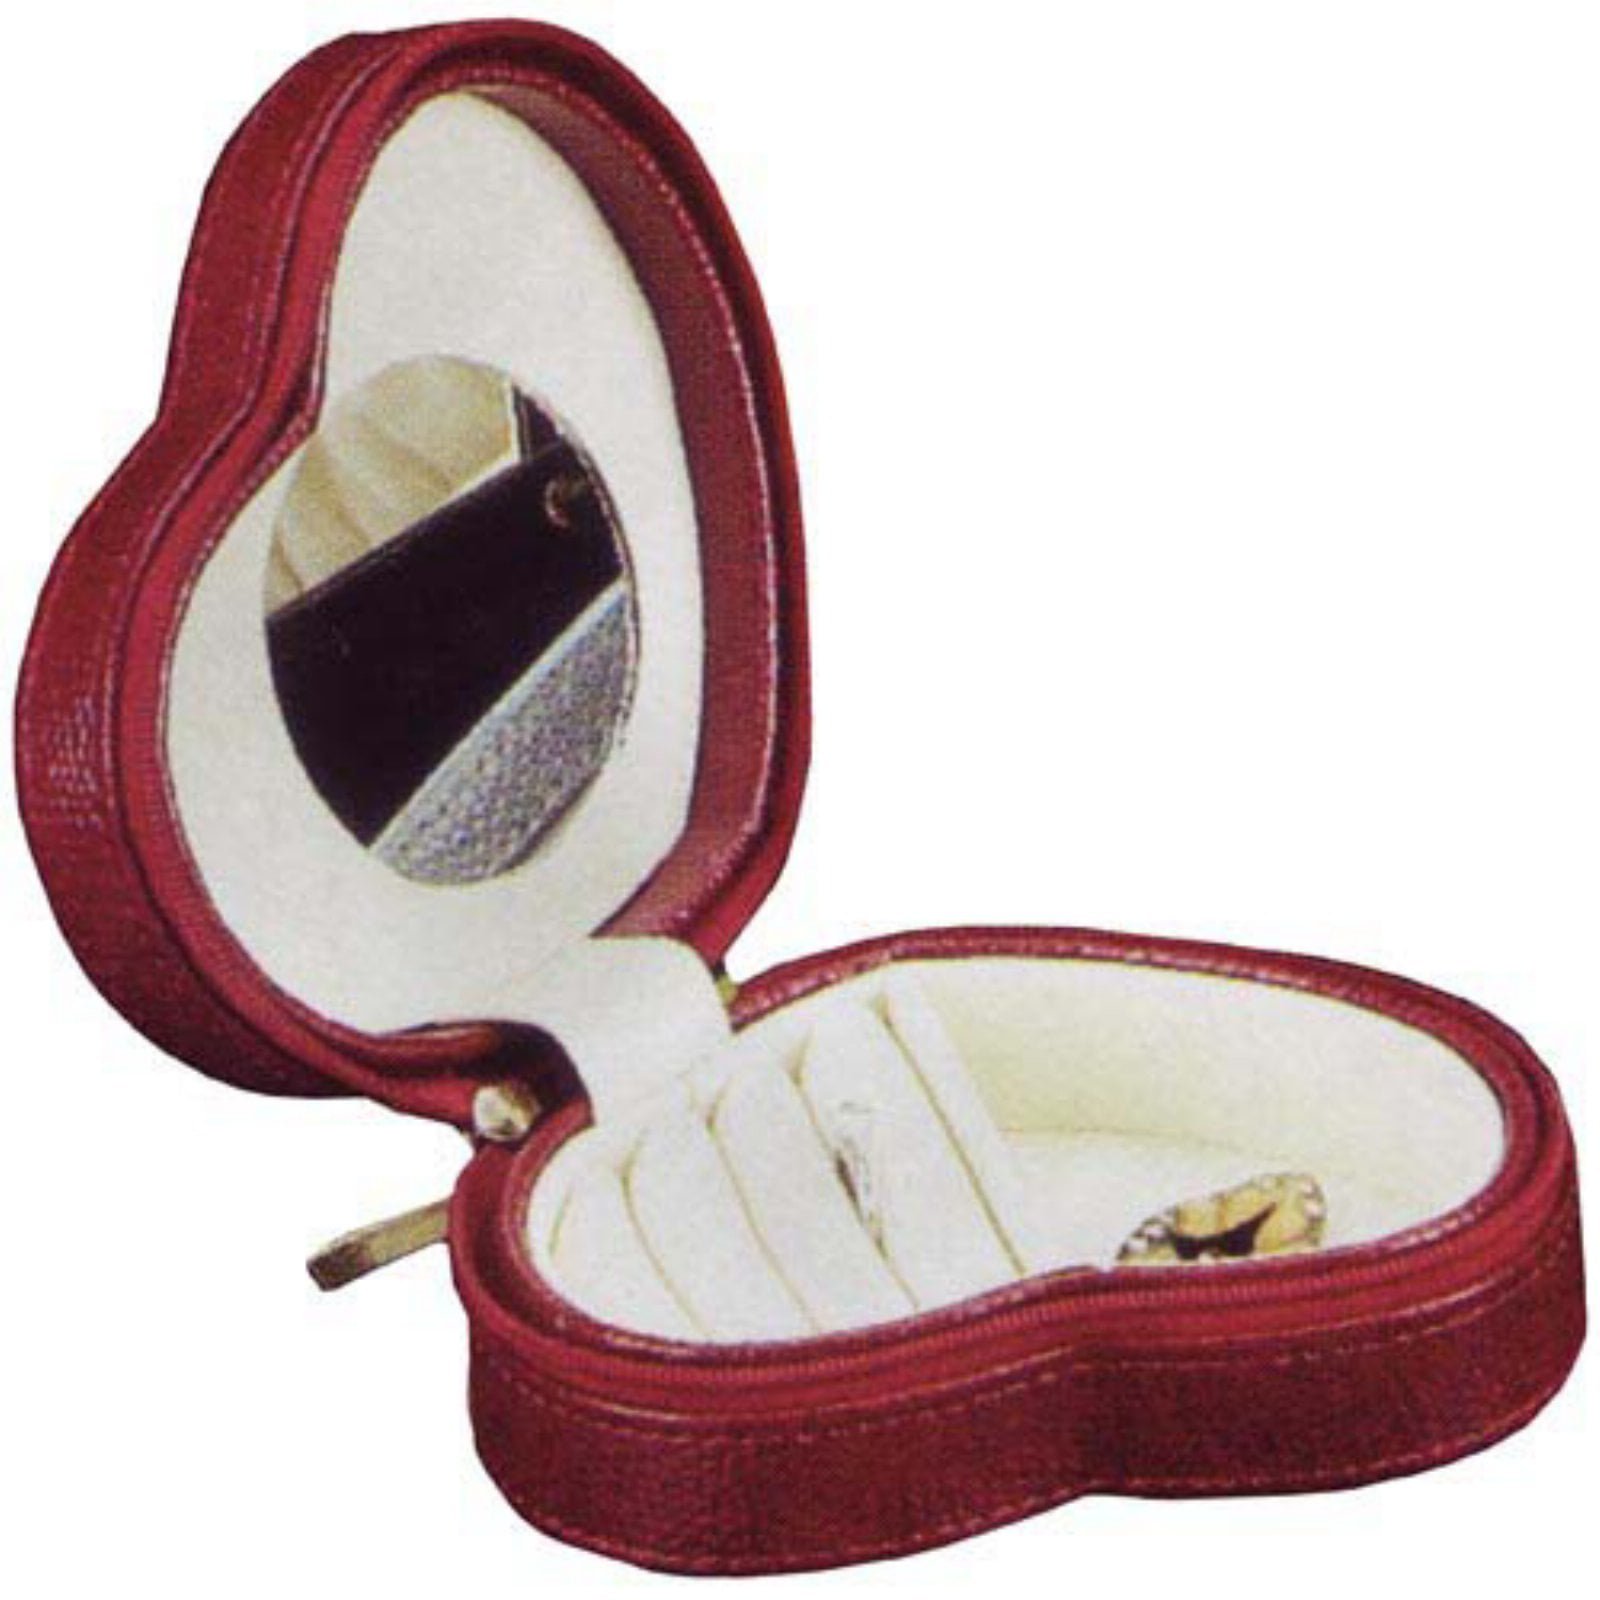 Bey-berk International Bb545red Lizard Leather Small Heart Shaped Jewelry Box With Mirror & Zippered Closure - Red